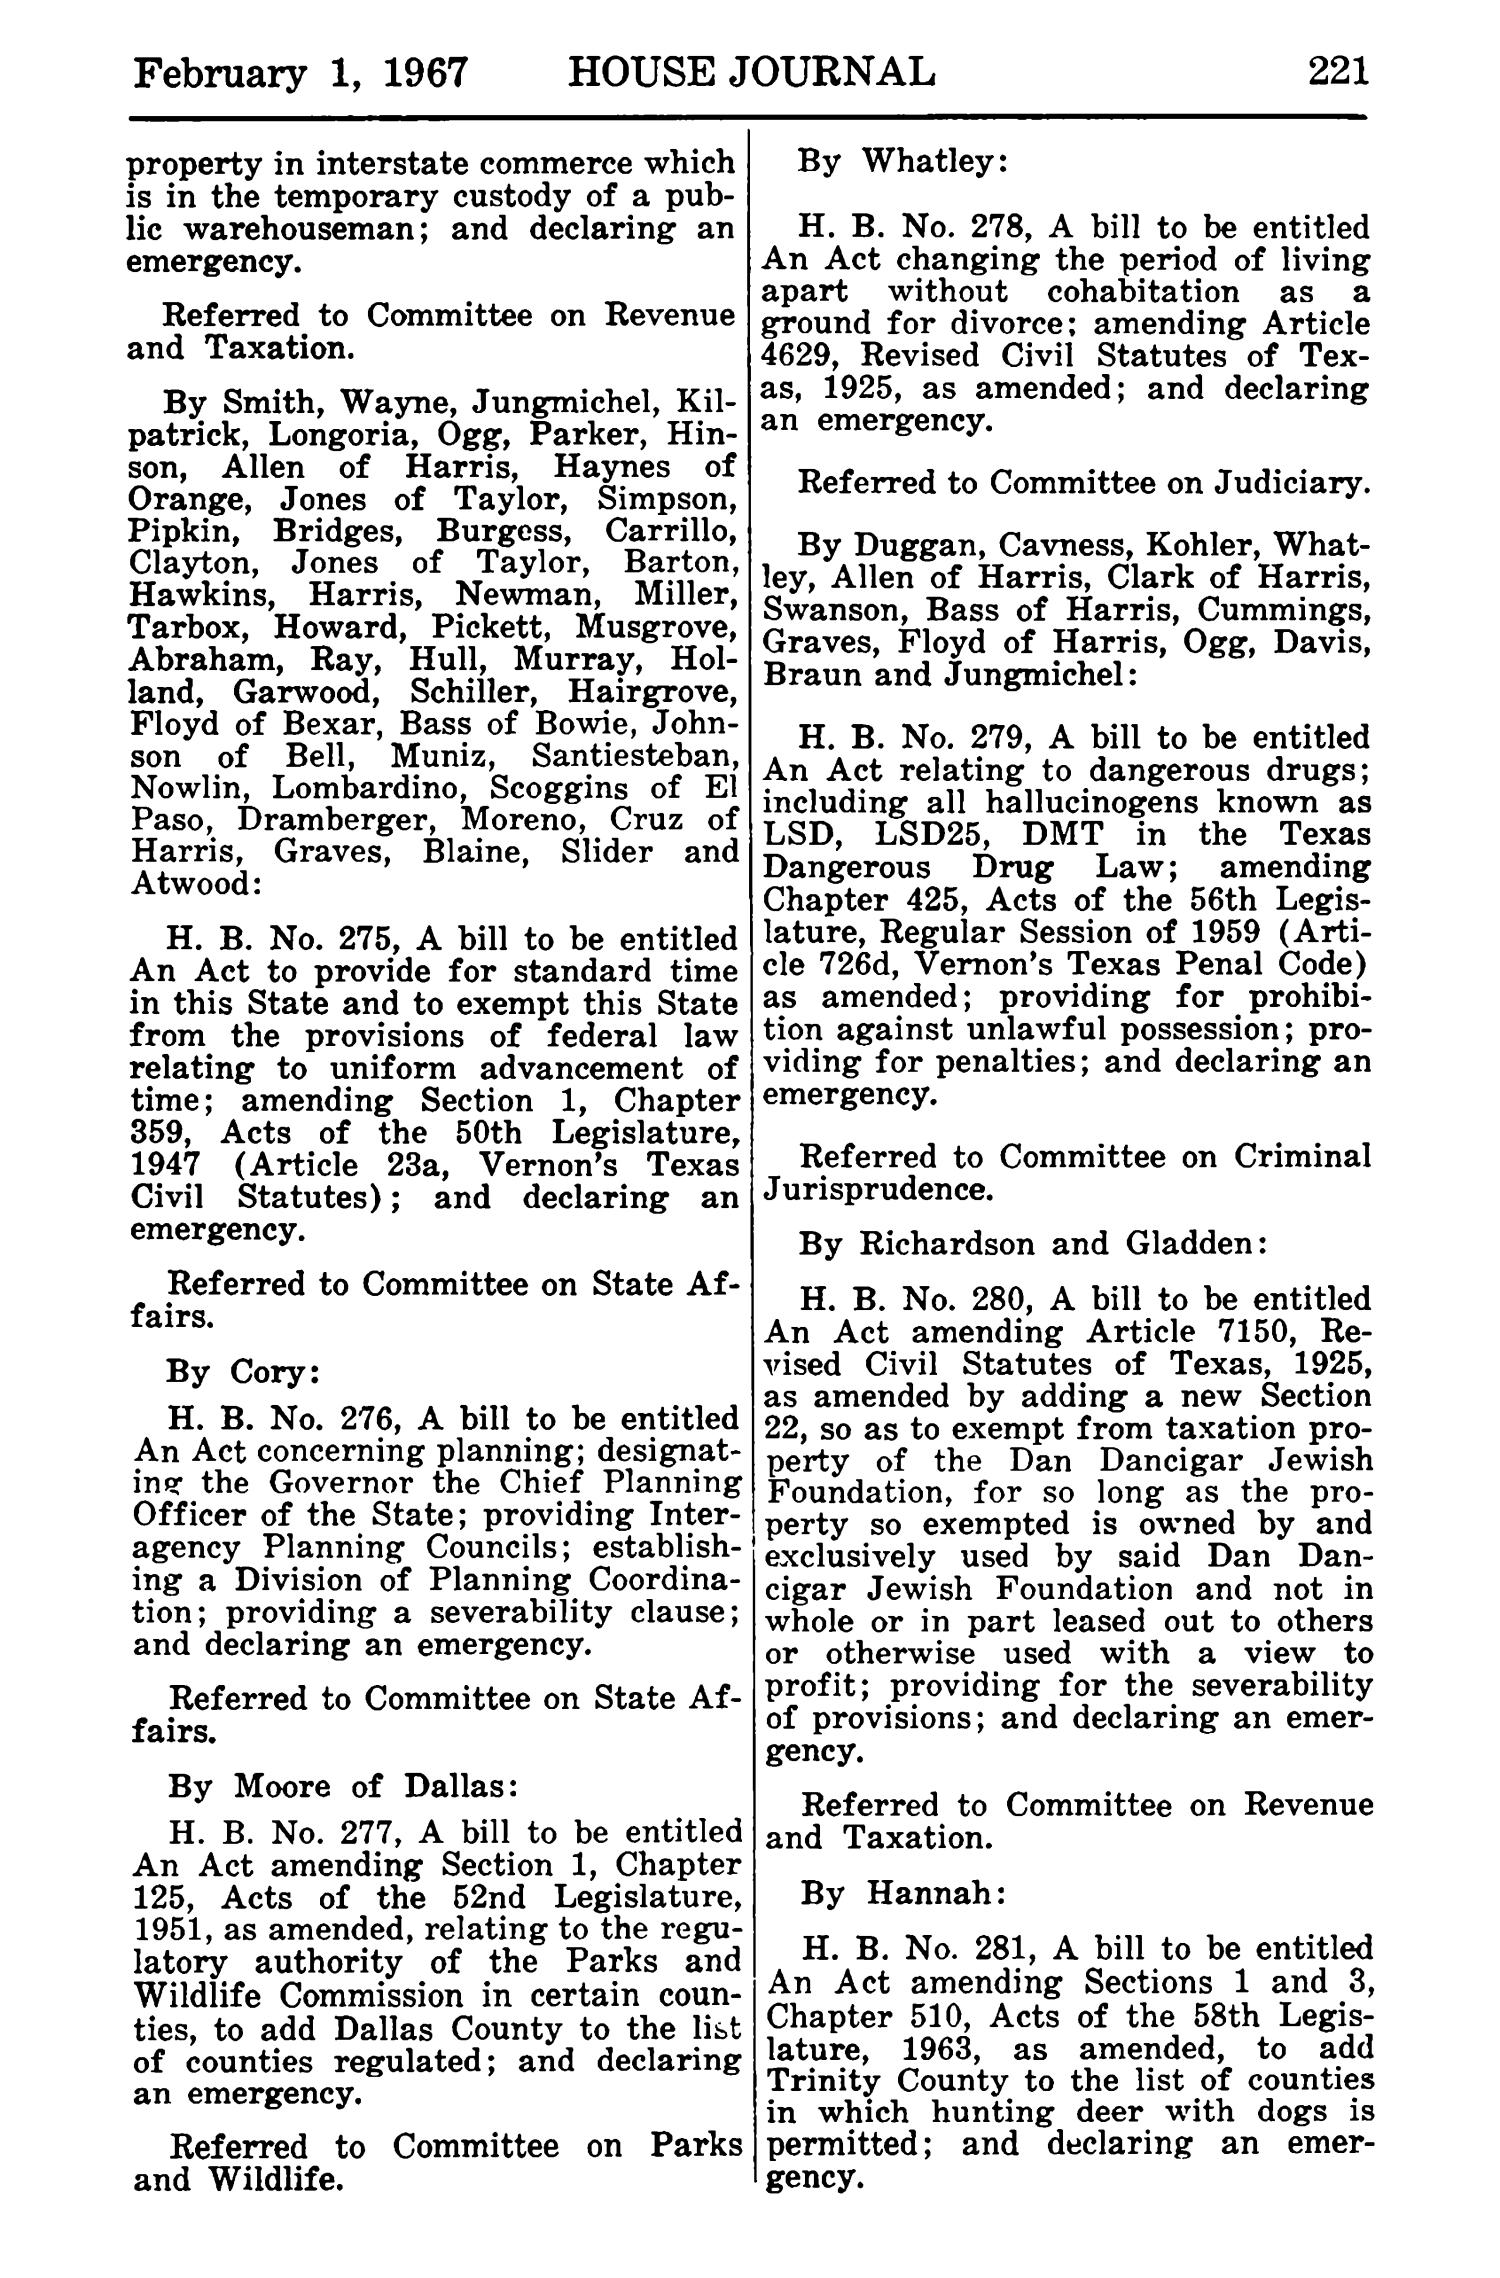 Journal of the House of Representatives of the Regular Session of the Sixtieth Legislature of the State of Texas, Volume 1
                                                
                                                    221
                                                